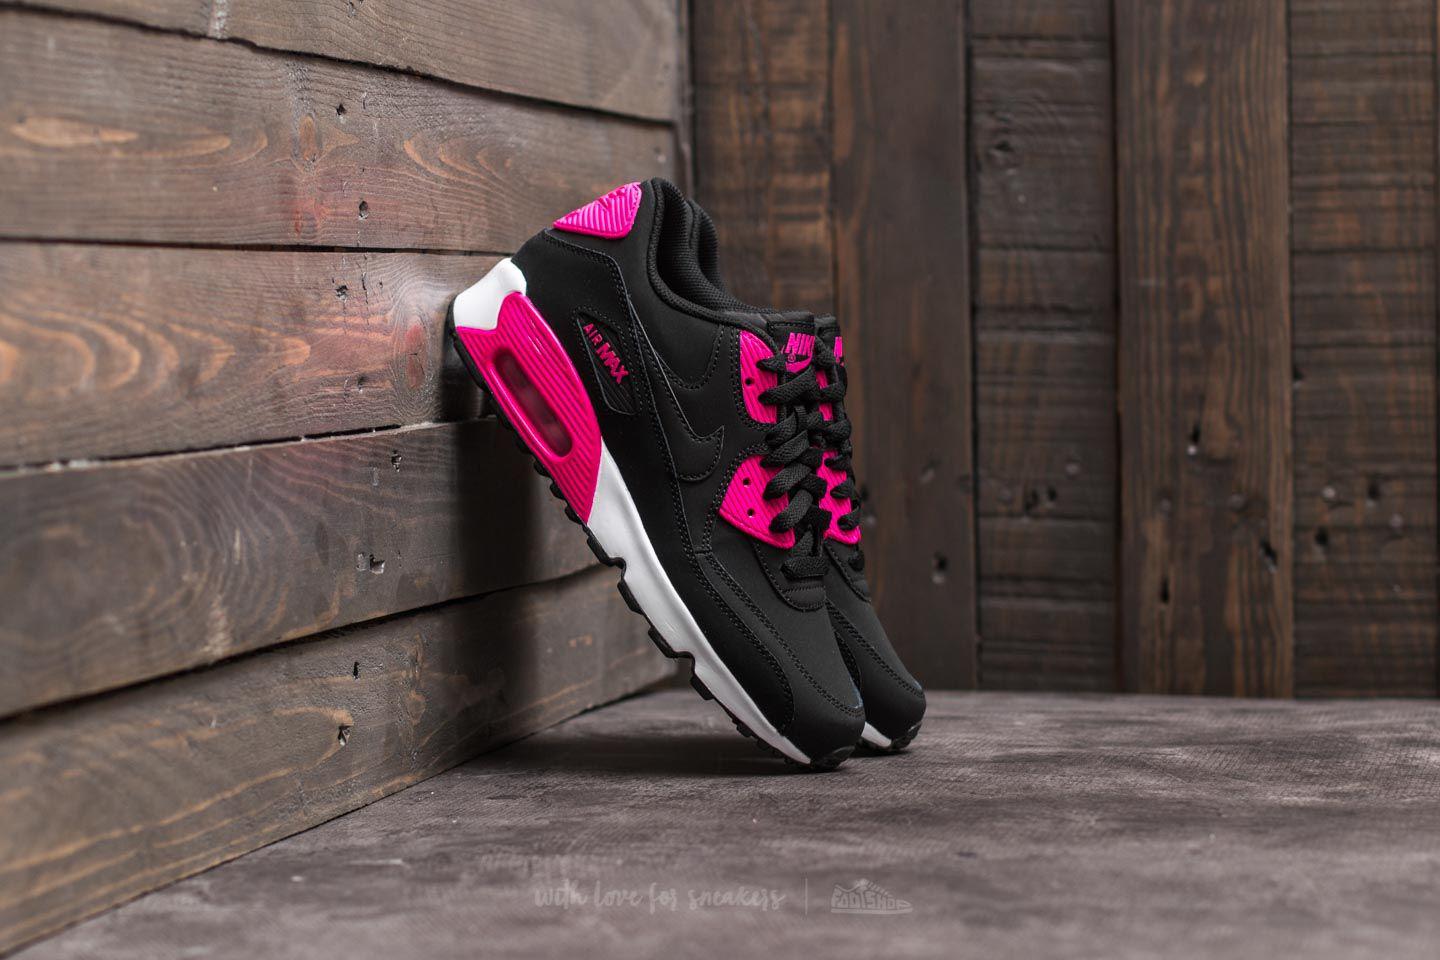 Nike Air Max 90 Leather (gs) Black/ Pink Prime-white - Lyst